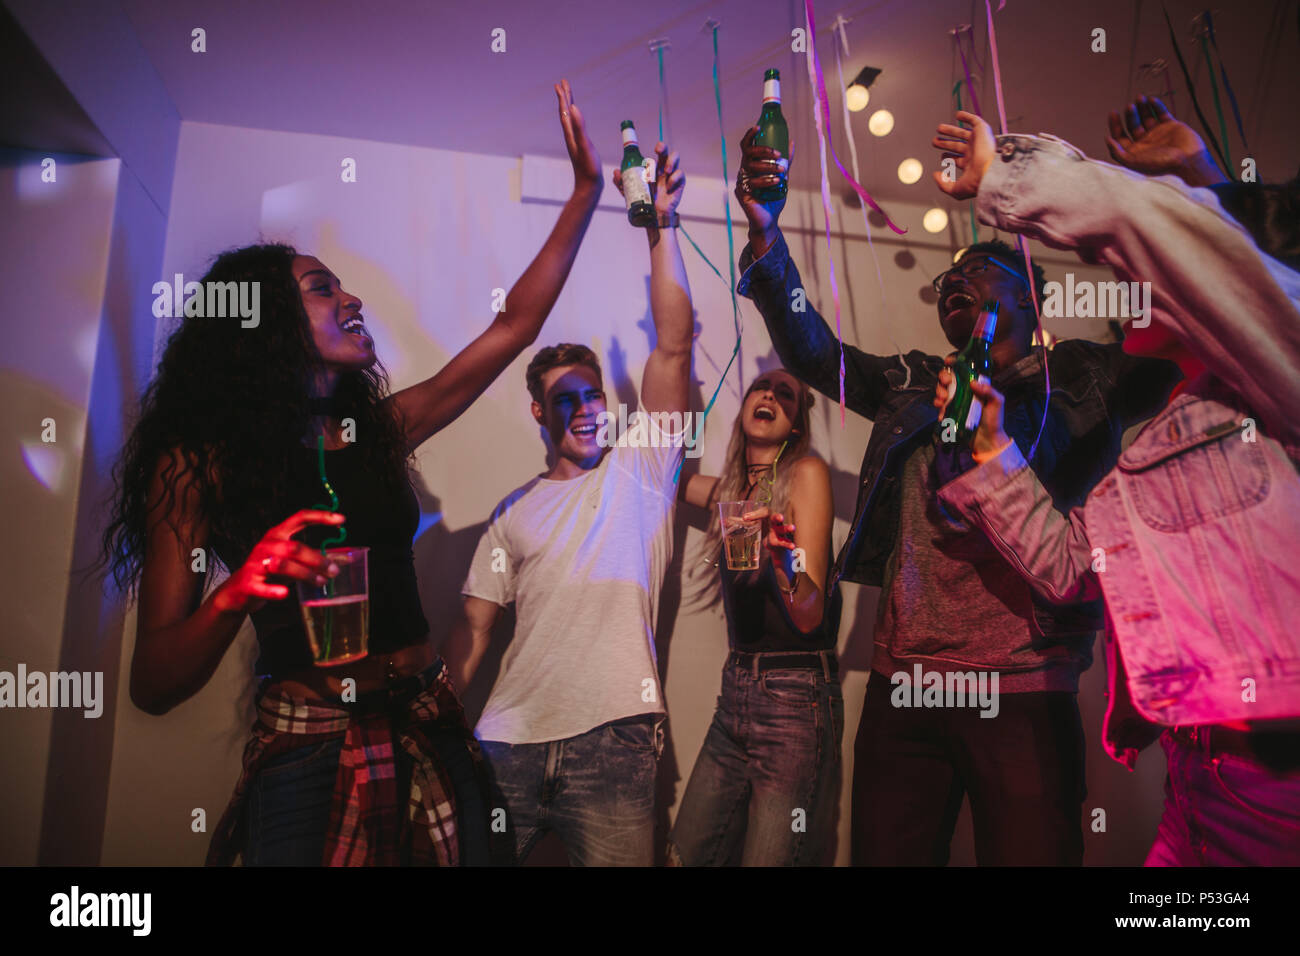 Friends toasting drinks at a house party. Young men and women having fun at a colorful house party with confetti all around. Stock Photo